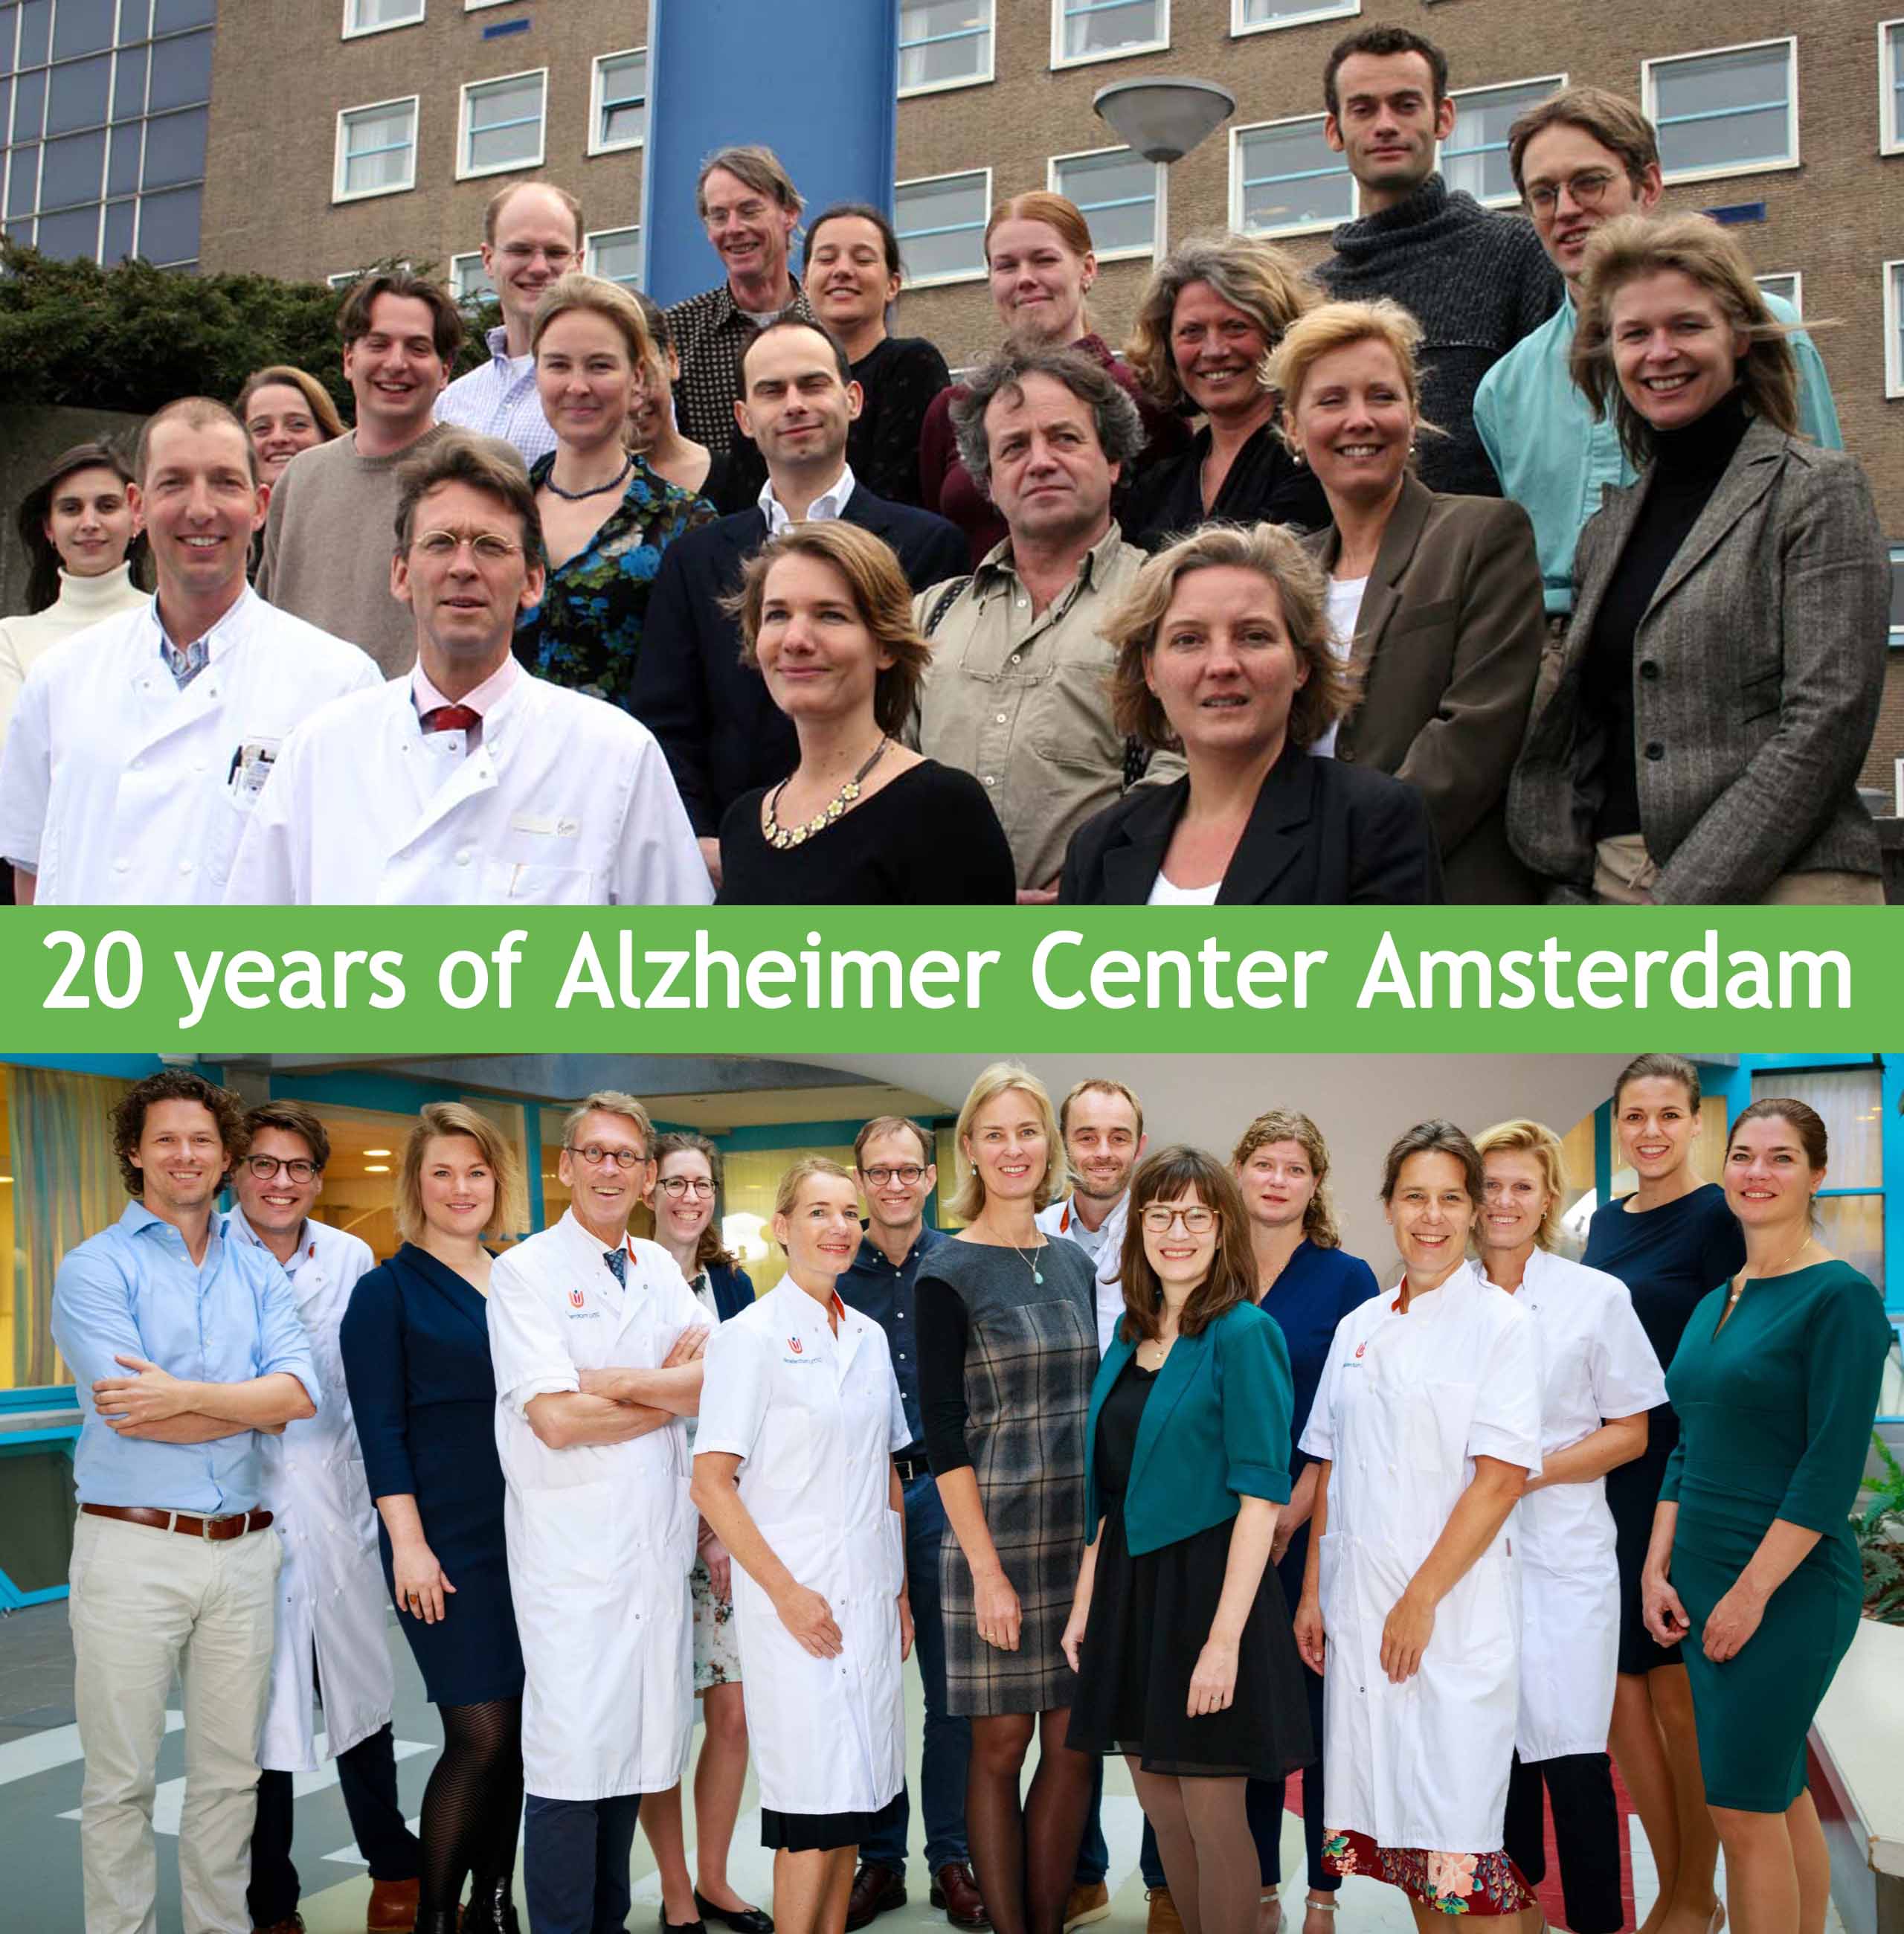 An old photo of 2005 and a photo of 2019 of the researchers at the Alzheimer Center Amsterdam